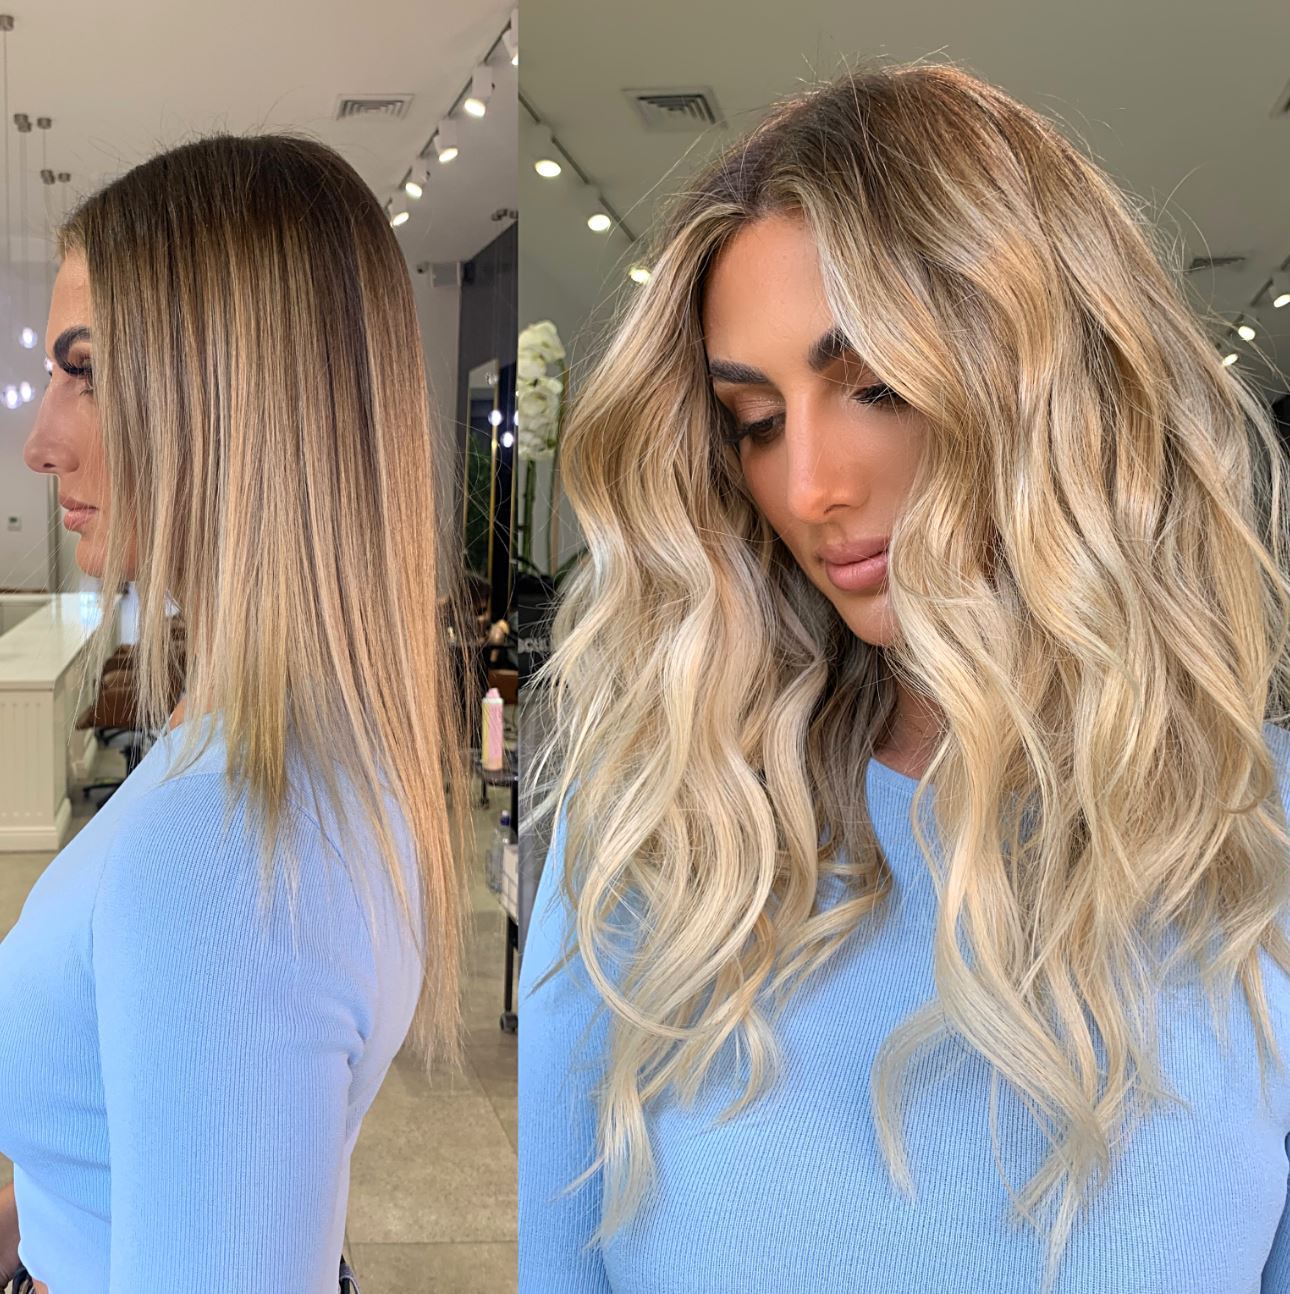 Complete 101 Guide: Clip In Hair Extensions